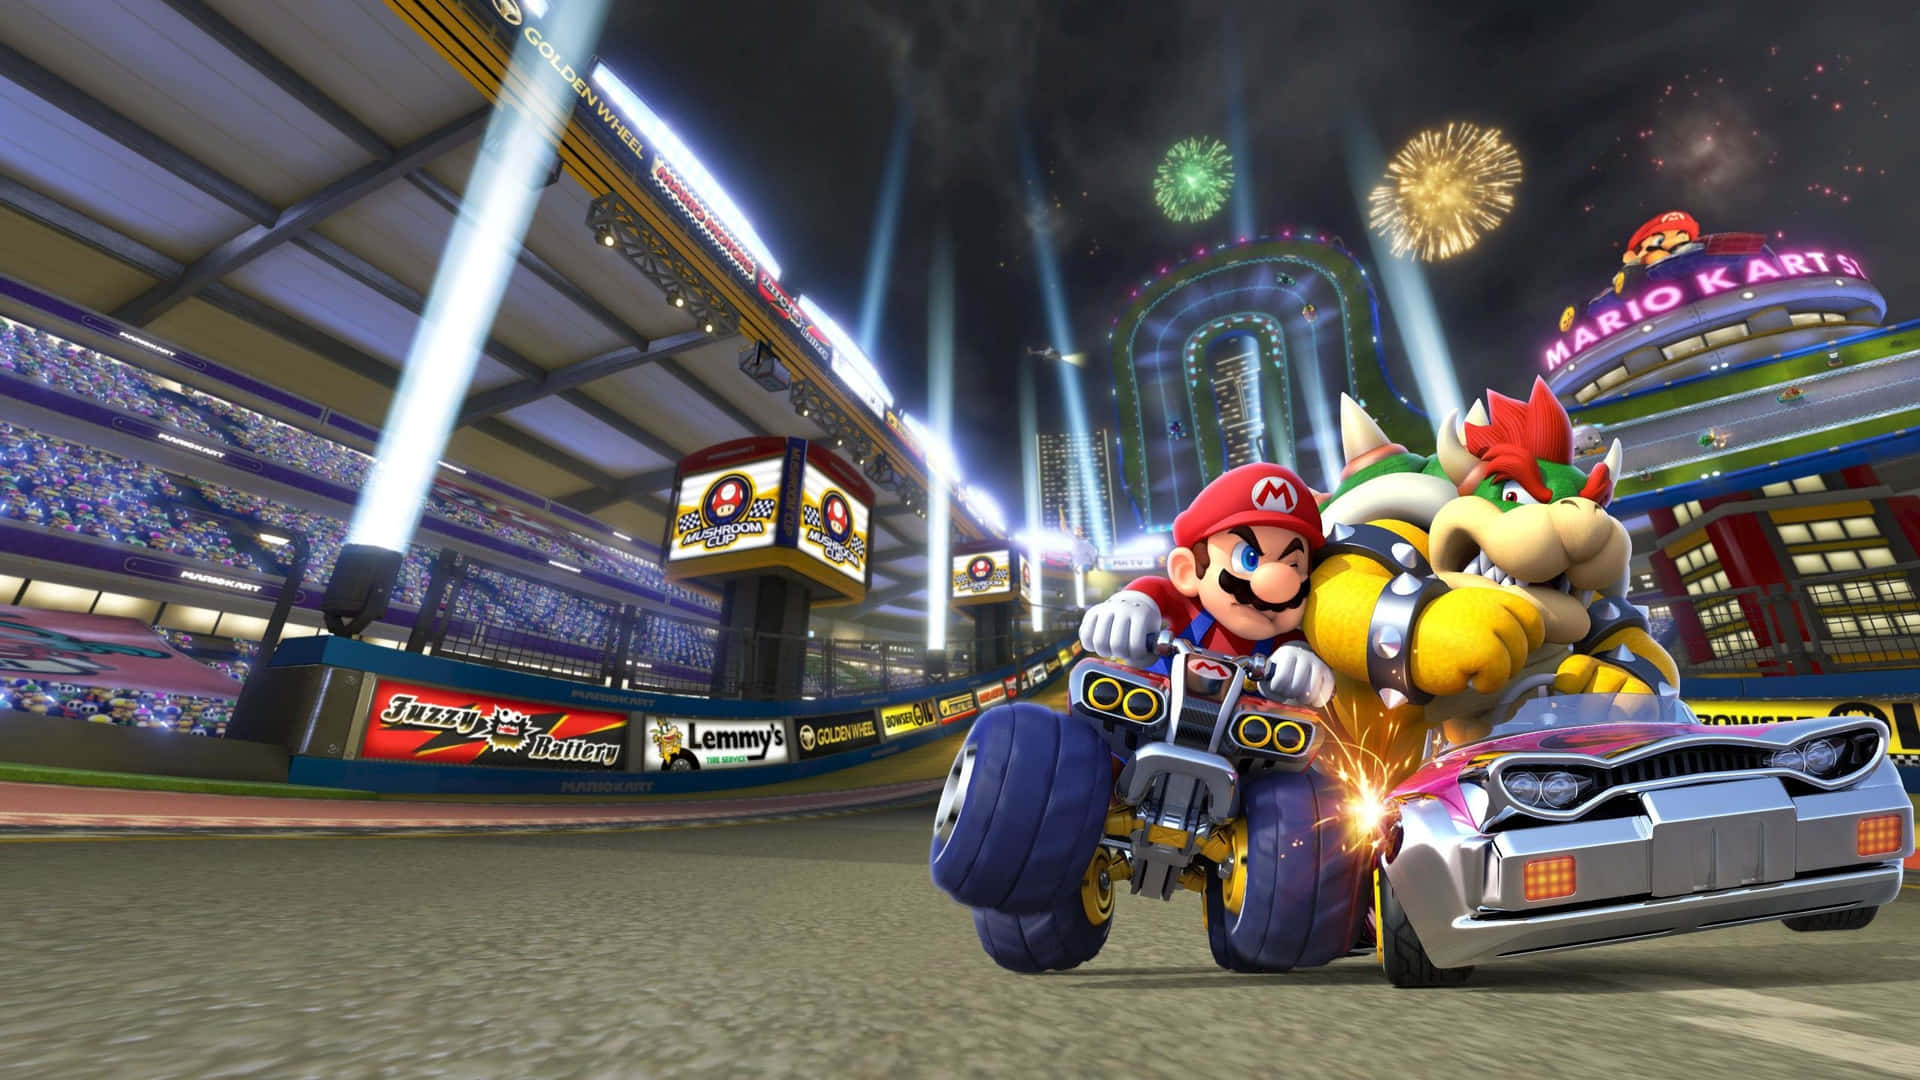 Experience the thrills and fuels of Mario Kart